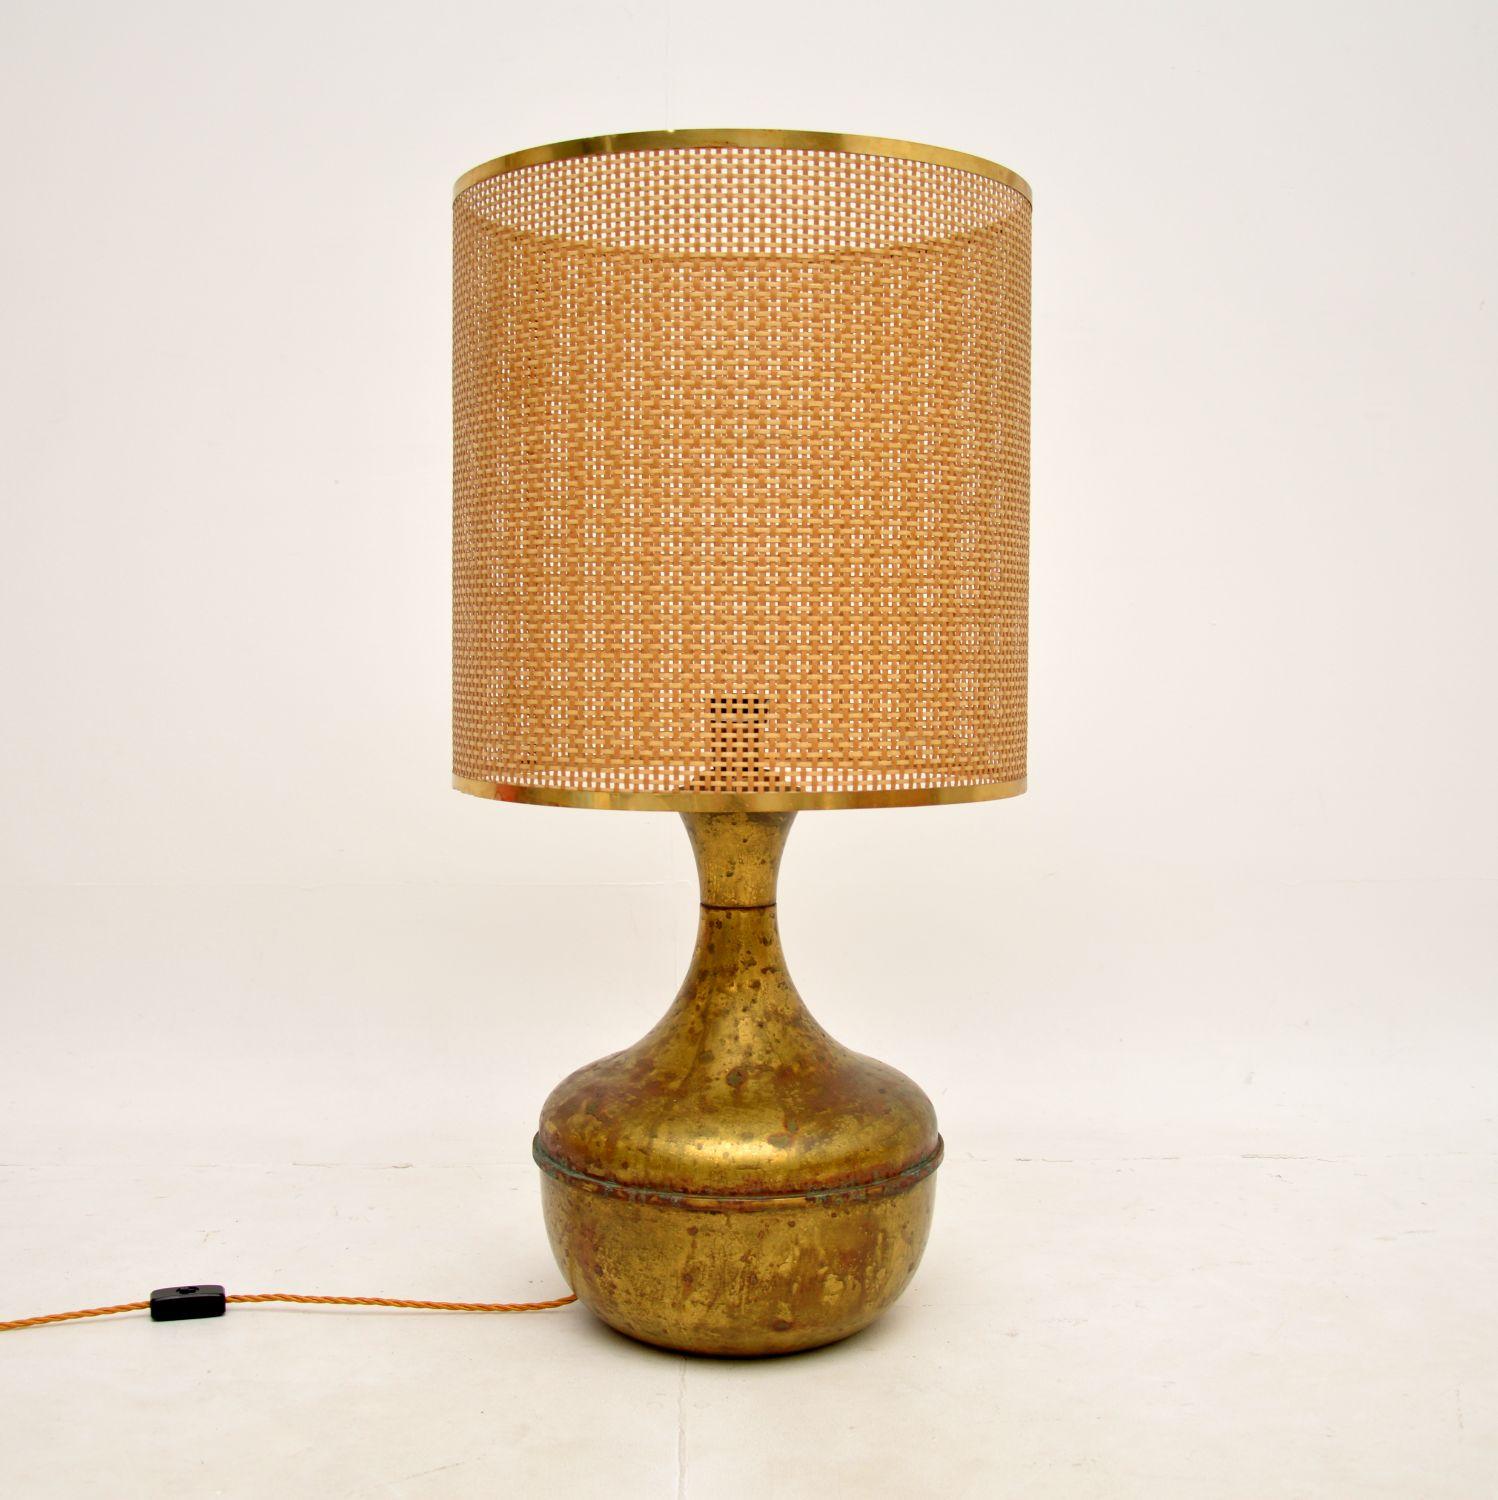 A beautiful and very impressive large vintage brass table lamp. This was made in England, it dates from around the 1960’s.

The beaten brass is beautifully aged and has an amazing patina, showing just the right amount of wear. The lamp came with